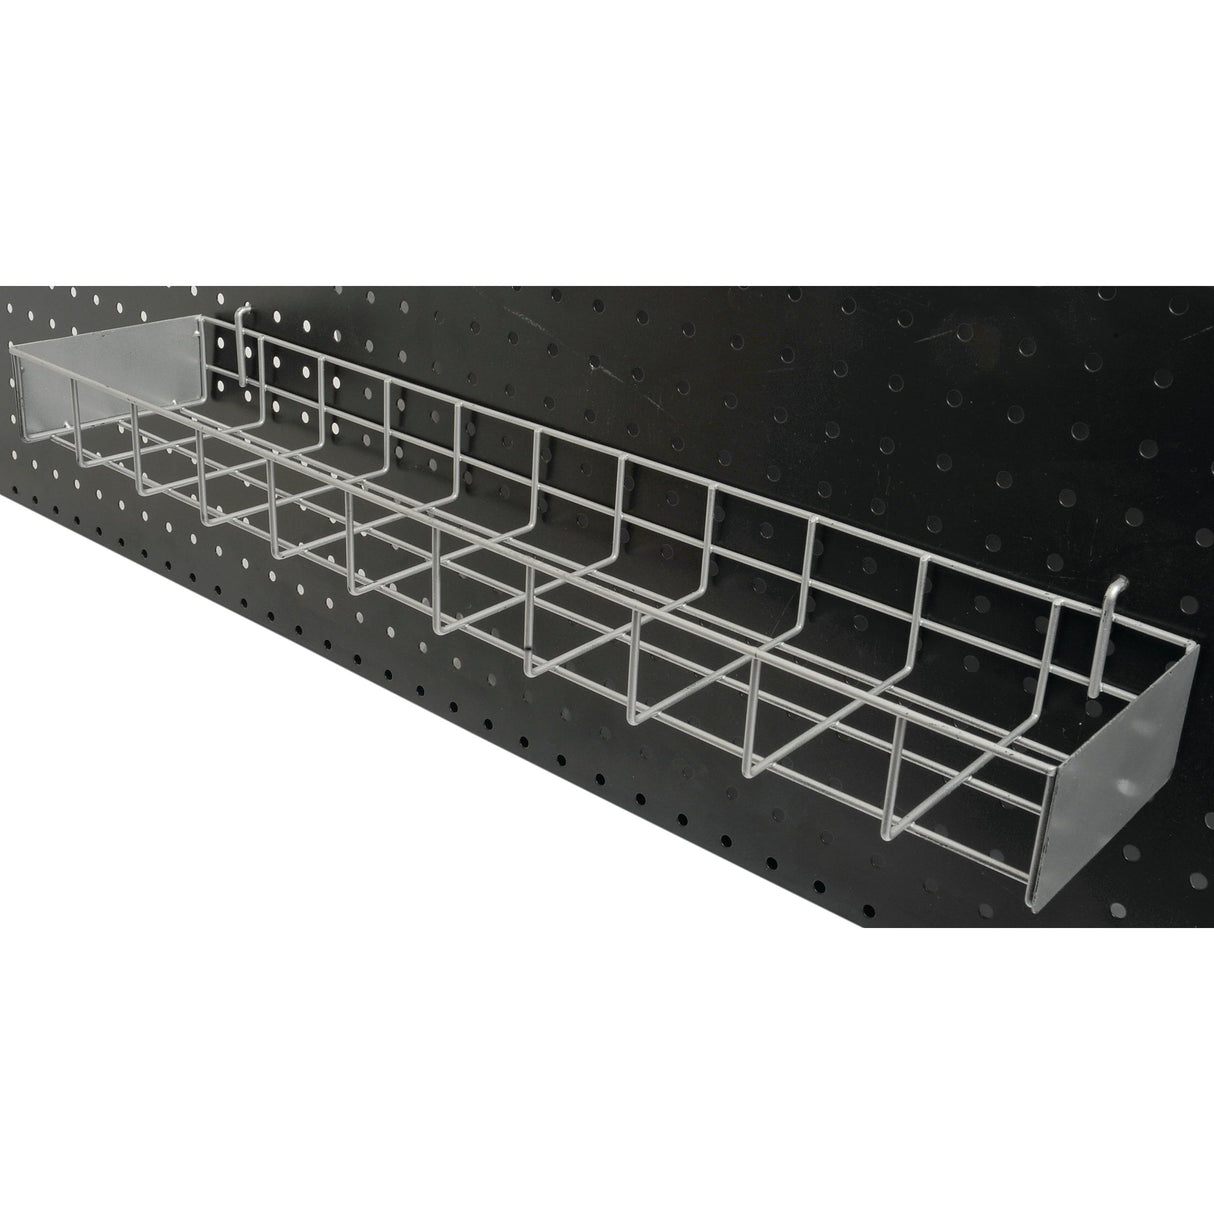 DISPLAY-STAND BASKET
 - S.53587 - Farming Parts